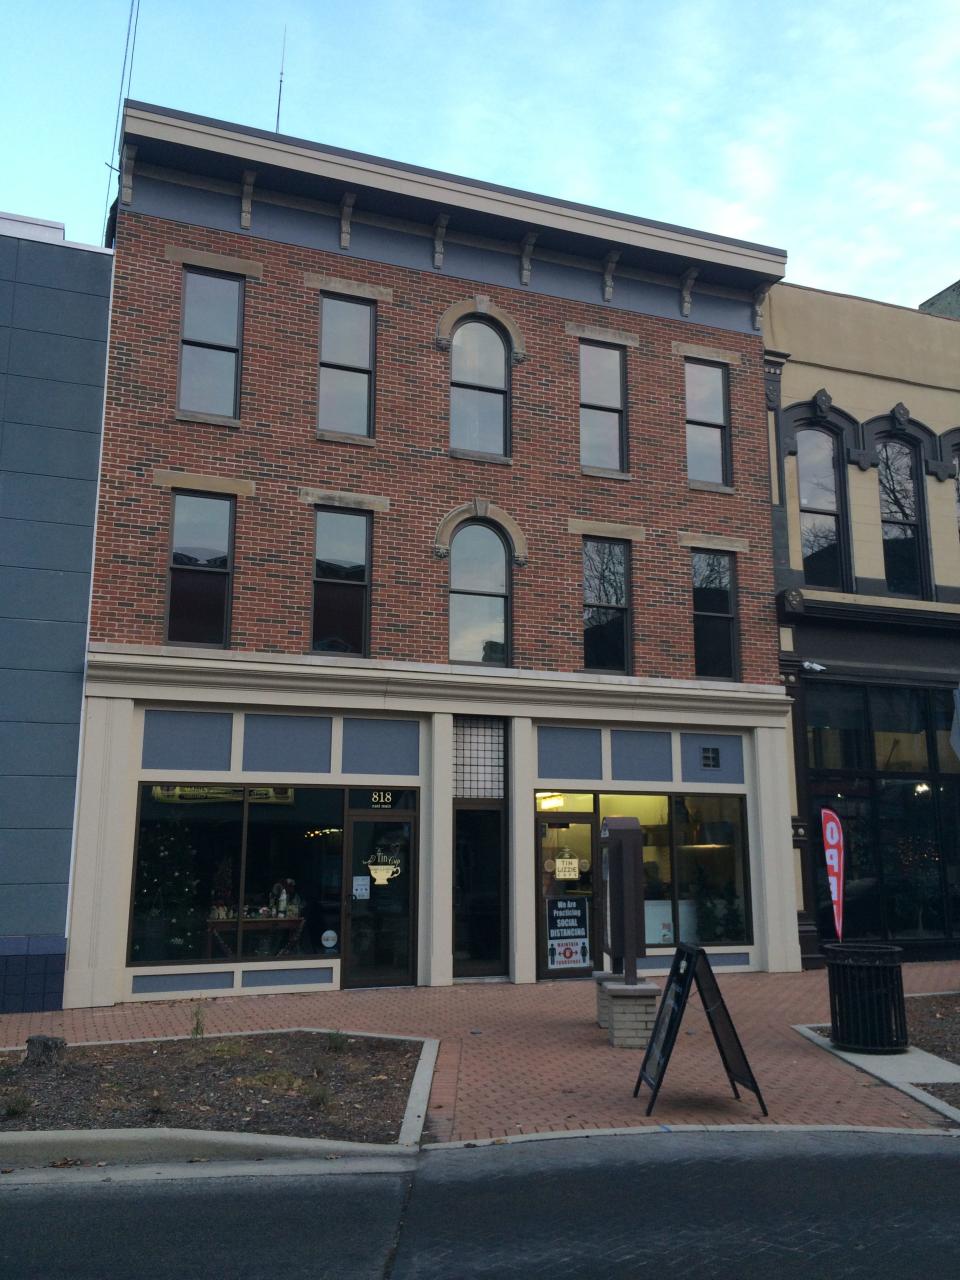 Richmond's Stellar facade project helped renovate the East Main Street building that houses The Tin Lizzie Cafe and the Tin Cup Tea and Gift Shop.